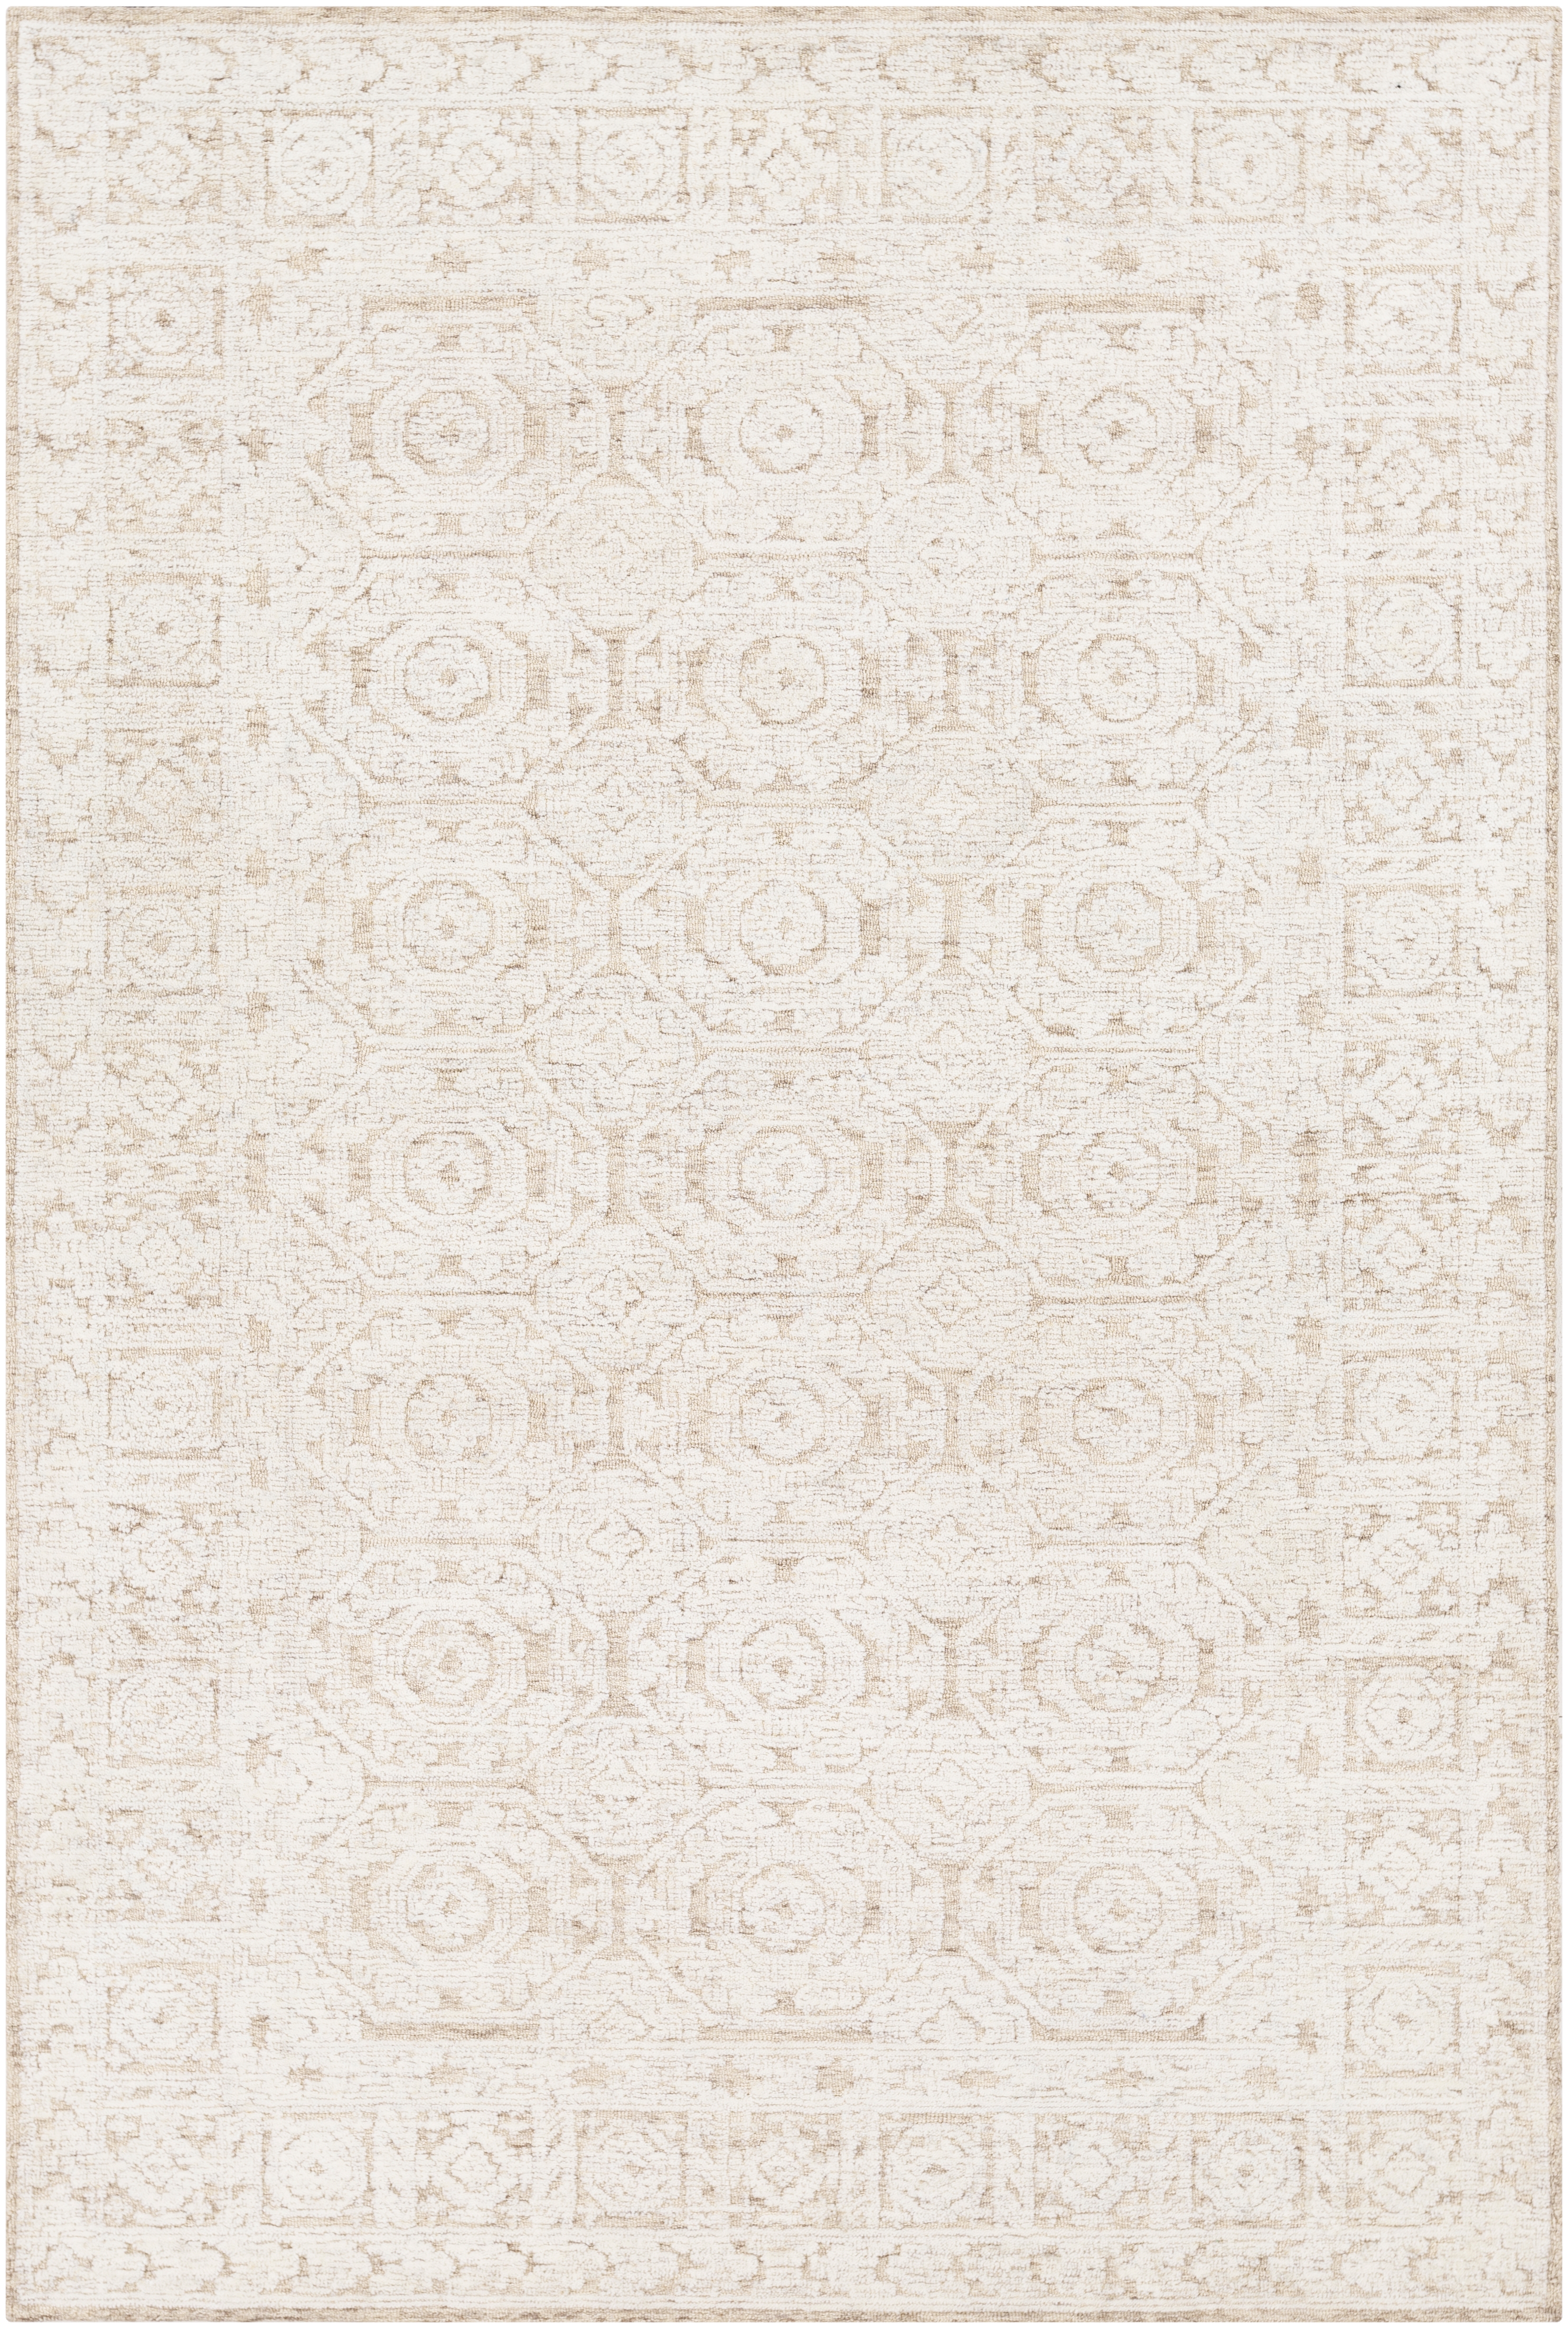 Louvre Rug, 10' x 14' - Image 0